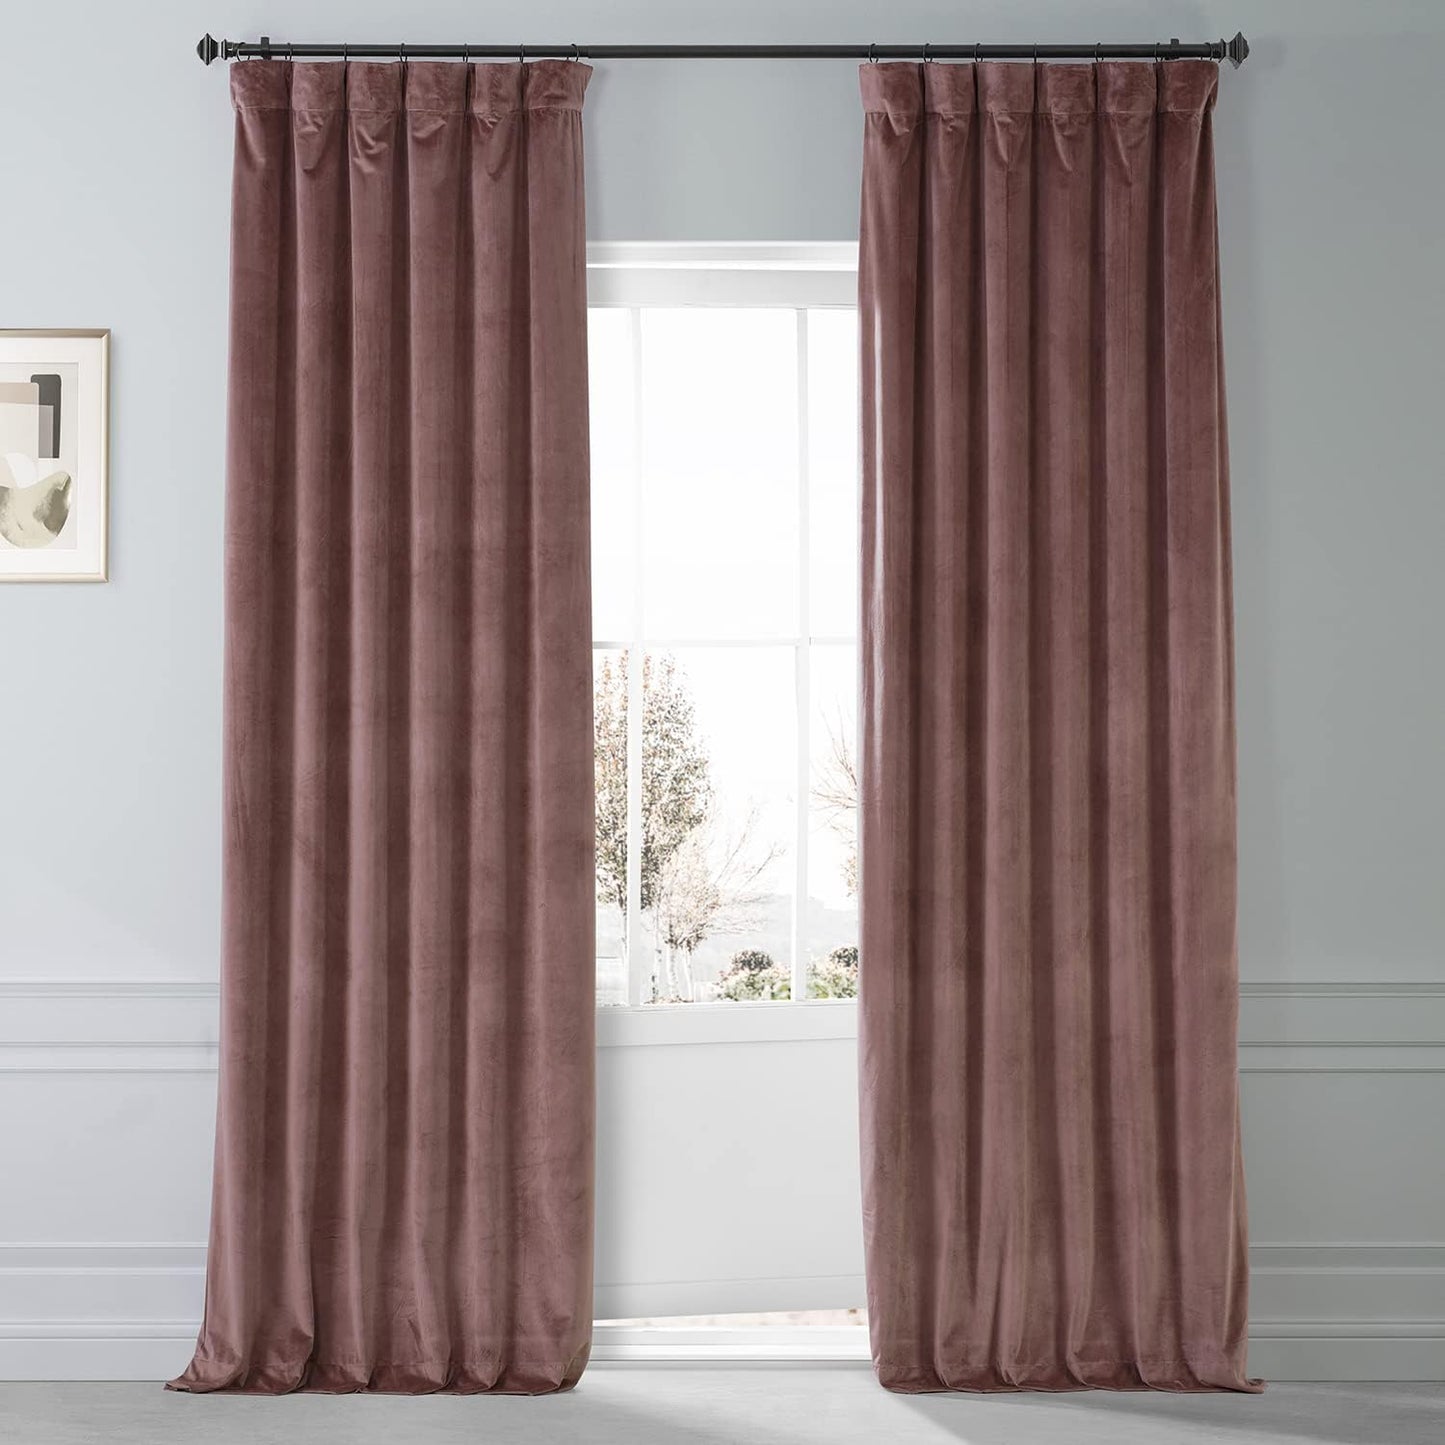 HPD HALF PRICE DRAPES Blackout Solid Thermal Insulated Window Curtain 50 X 96 Signature Plush Velvet Curtains for Bedroom & Living Room (1 Panel), VPYC-SBO198593-96, Diva Cream  Exclusive Fabrics & Furnishings Rosehip 50 X 108 